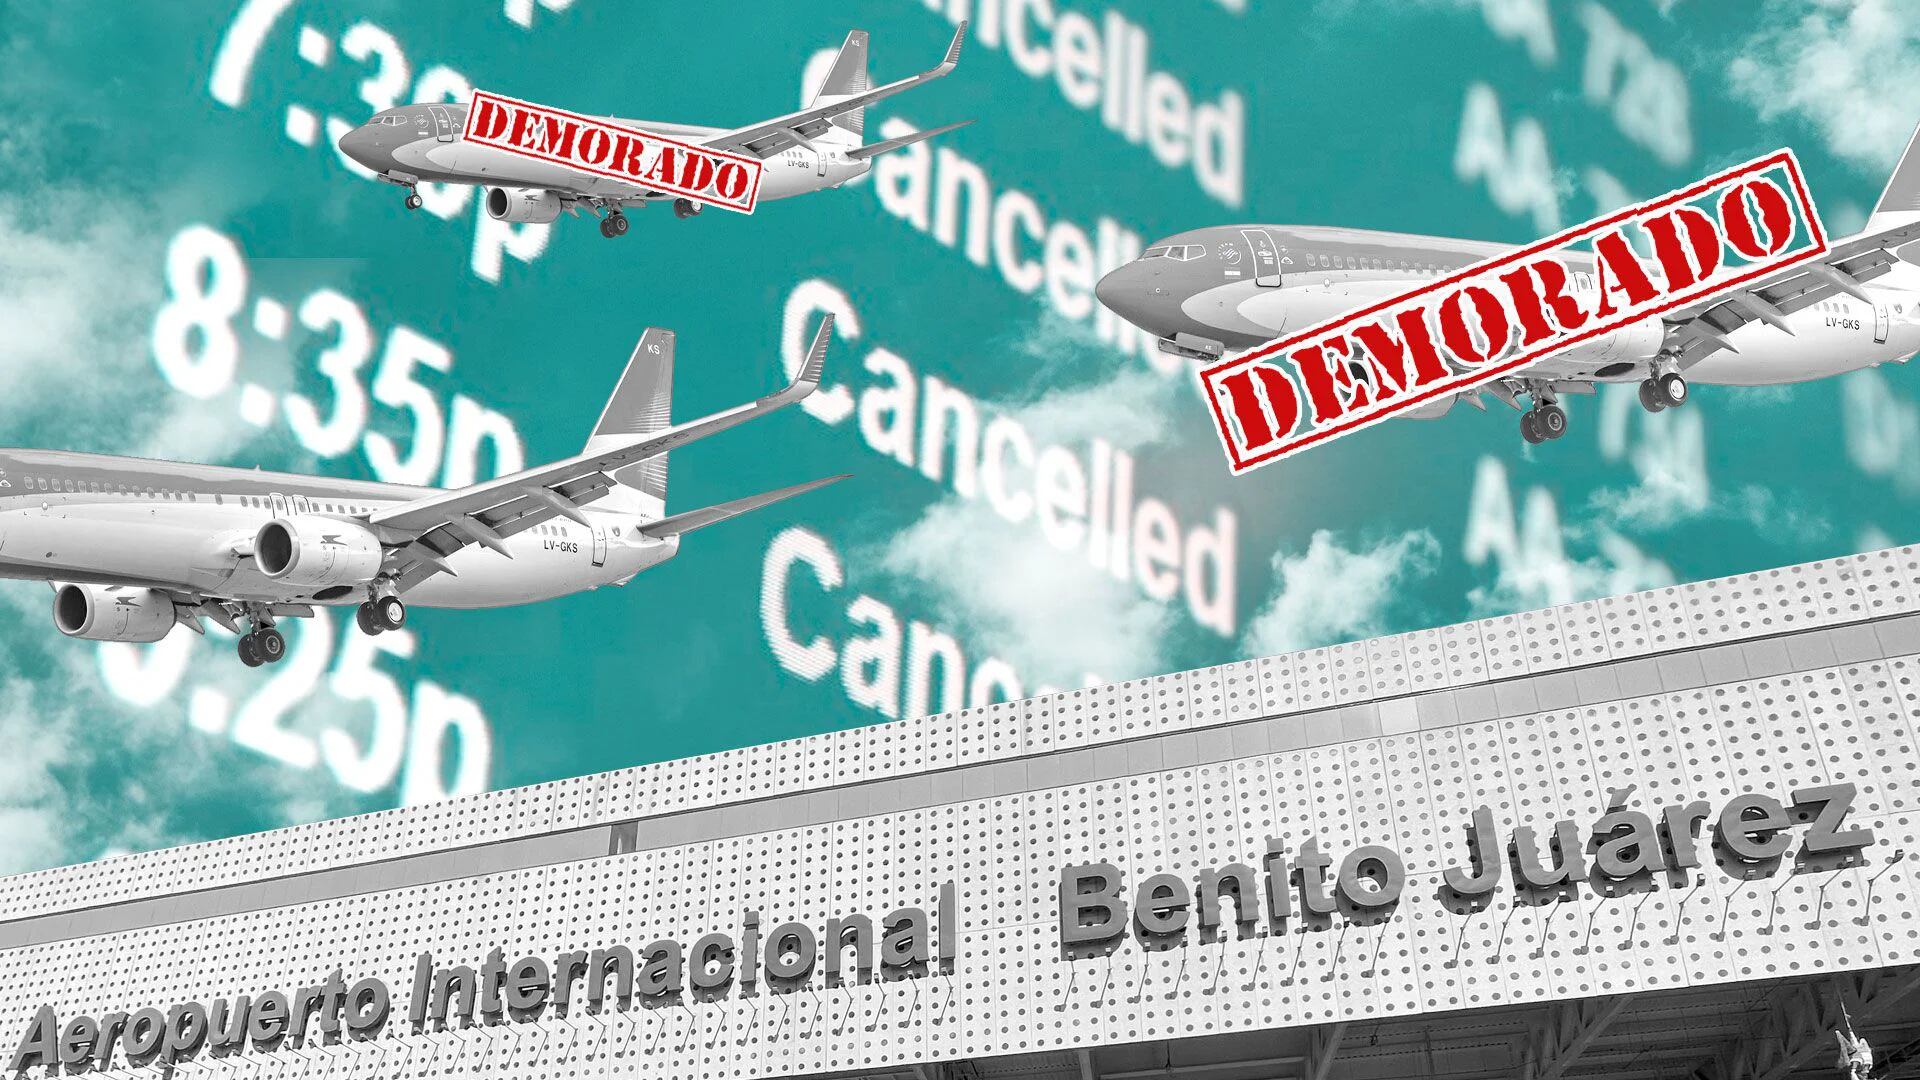 The AICM adds hundreds of thousands of flights with millions of passengers, delays and cancellations are inevitable (Infobae)